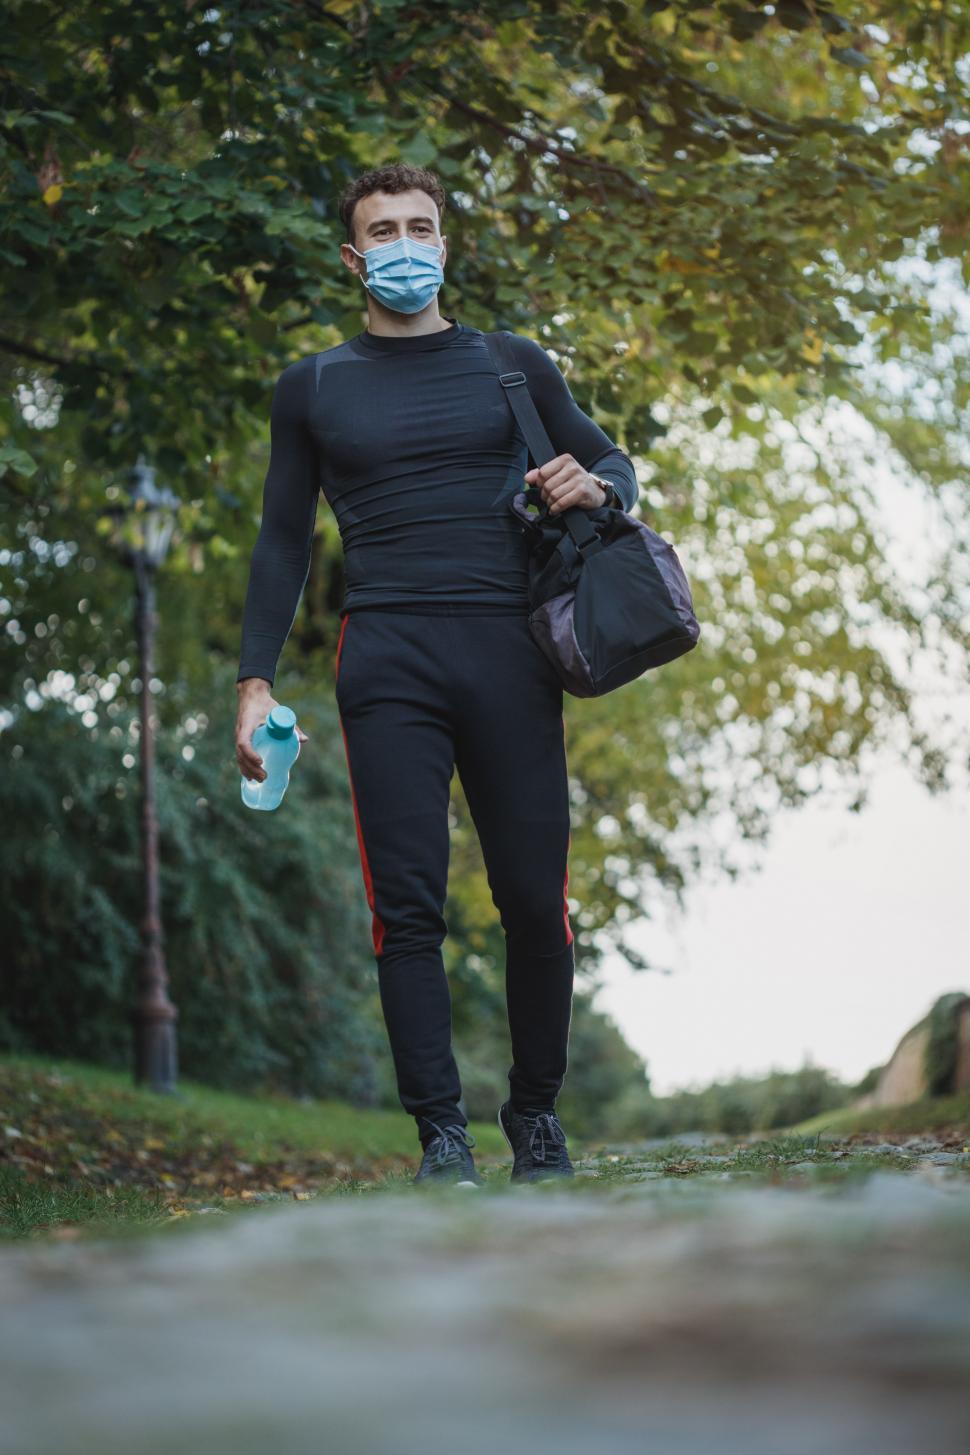 Free Image of Male athlete with bag and Coronavirus face mask in the park 